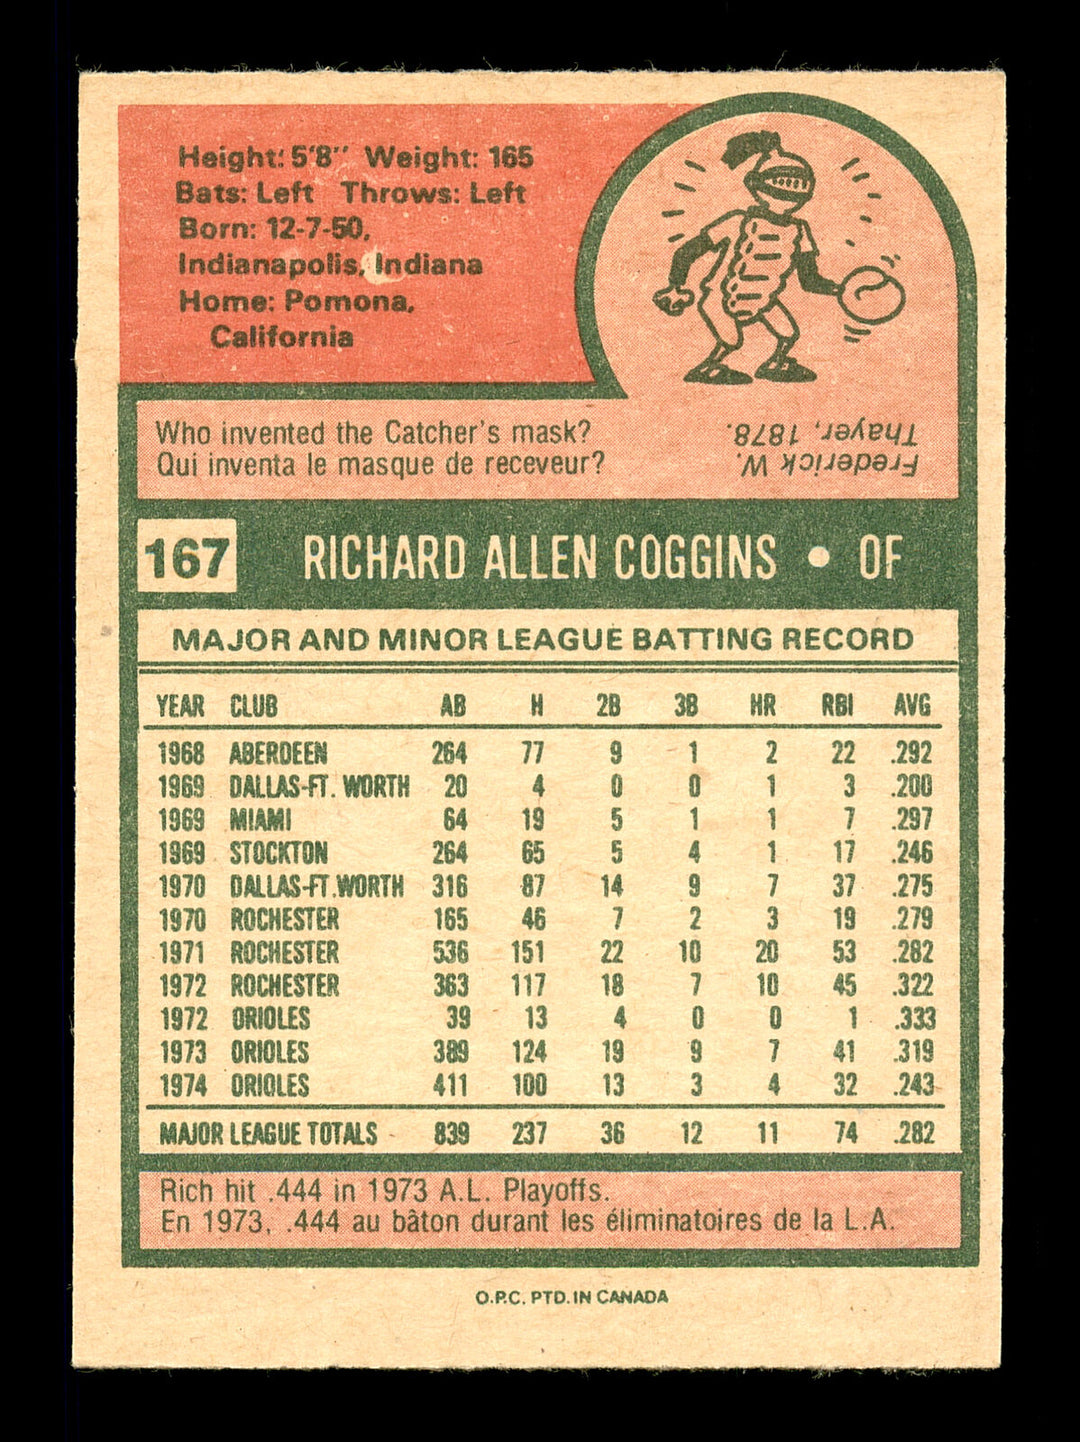 Rich Coggins Autographed Signed Auto 1975 O-Pee-Chee Card #167 Orioles 169384 Image 2